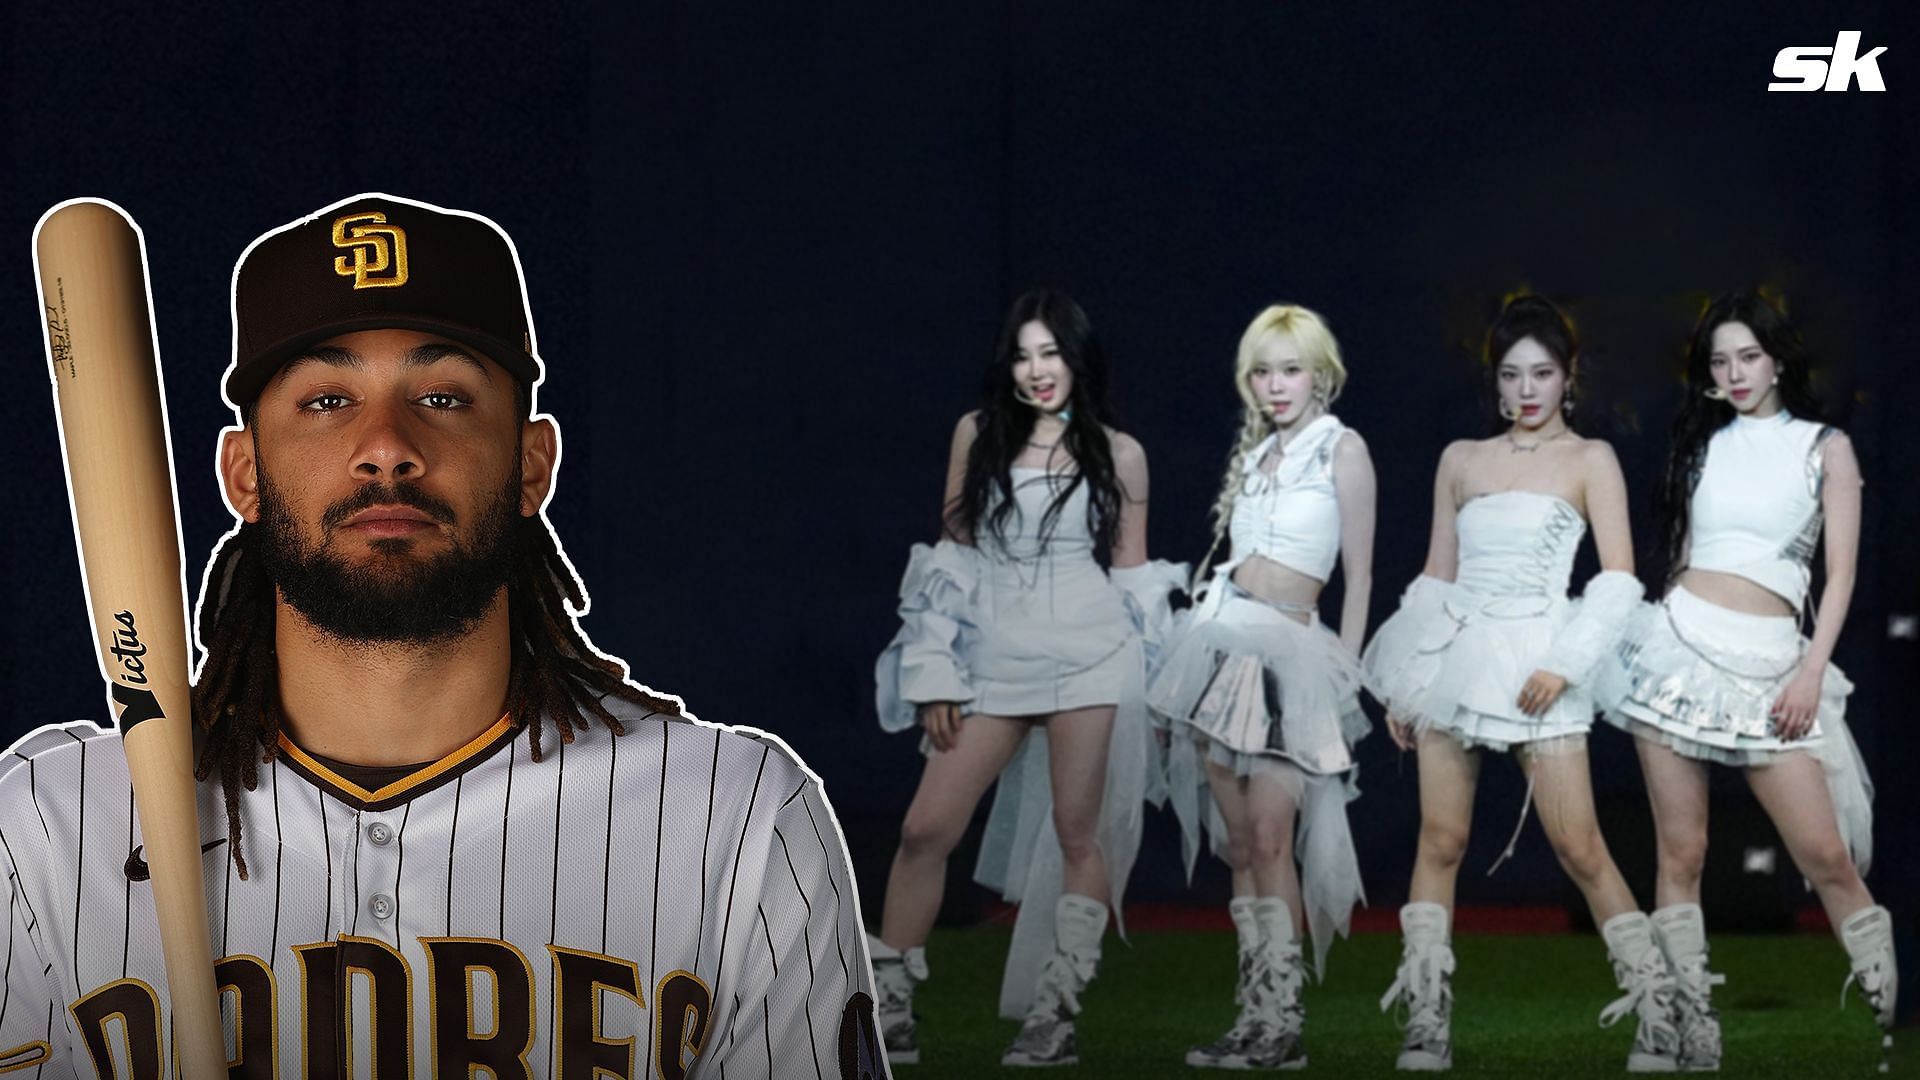 &ldquo;Got the best view&rdquo; - Fans react as Fernando Tatis Jr. watches K-Pop group aespa groove during Dodgers vs. Padres game opening